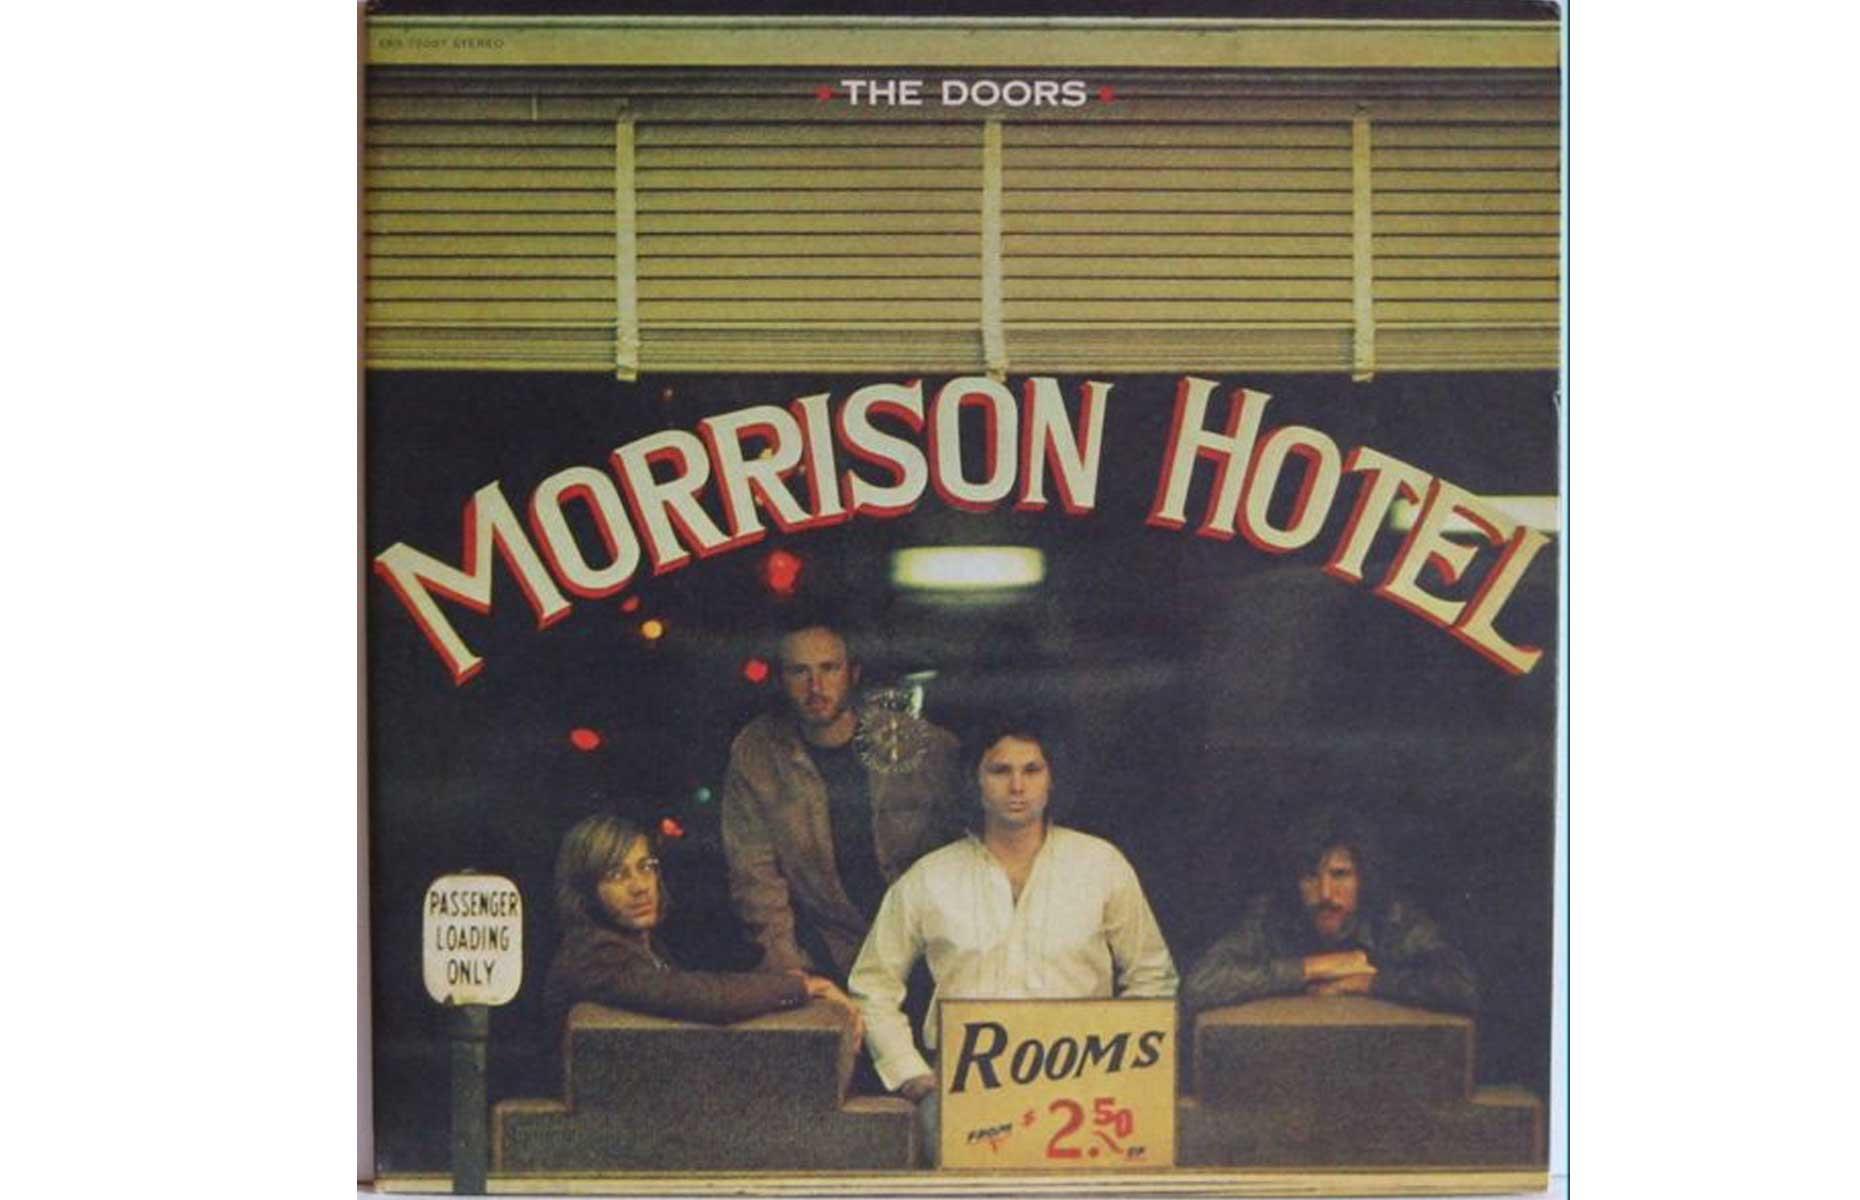 The Doors – Morrison Hotel: up to $2,500 (£2,124)